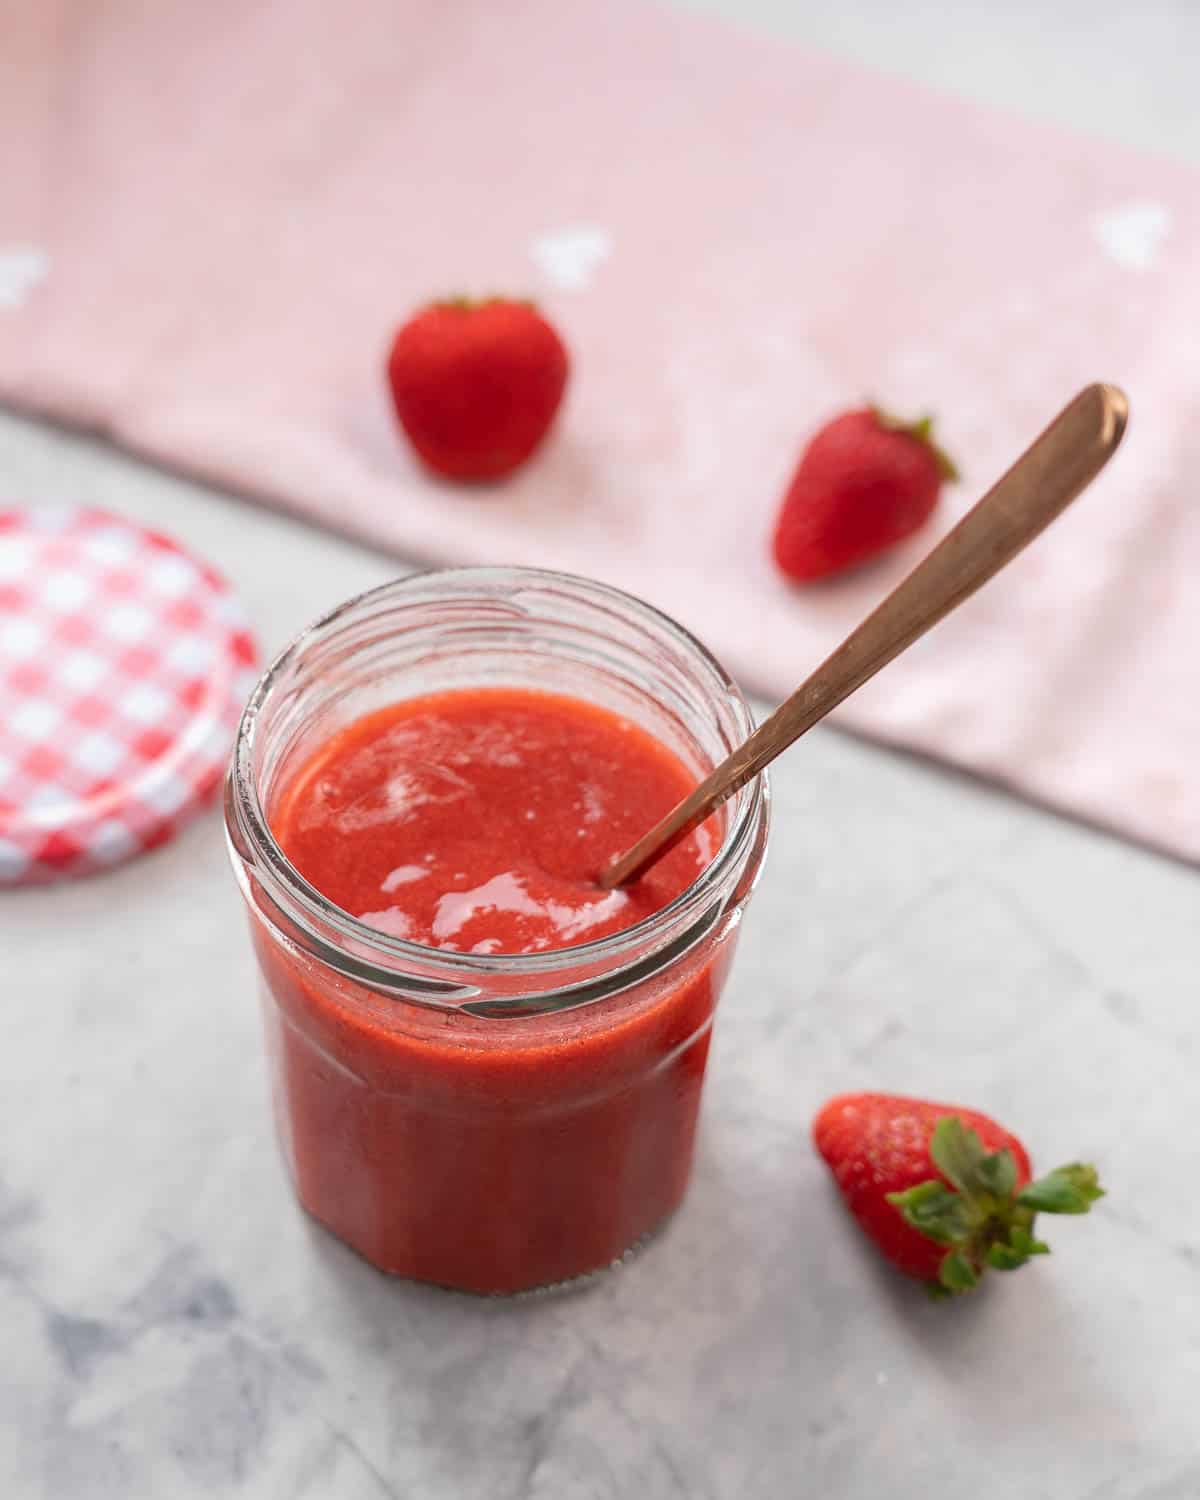 A glass jar of red fruit puree with a golden spoon resting in it, strawberries scattered on the bench around the jar. 